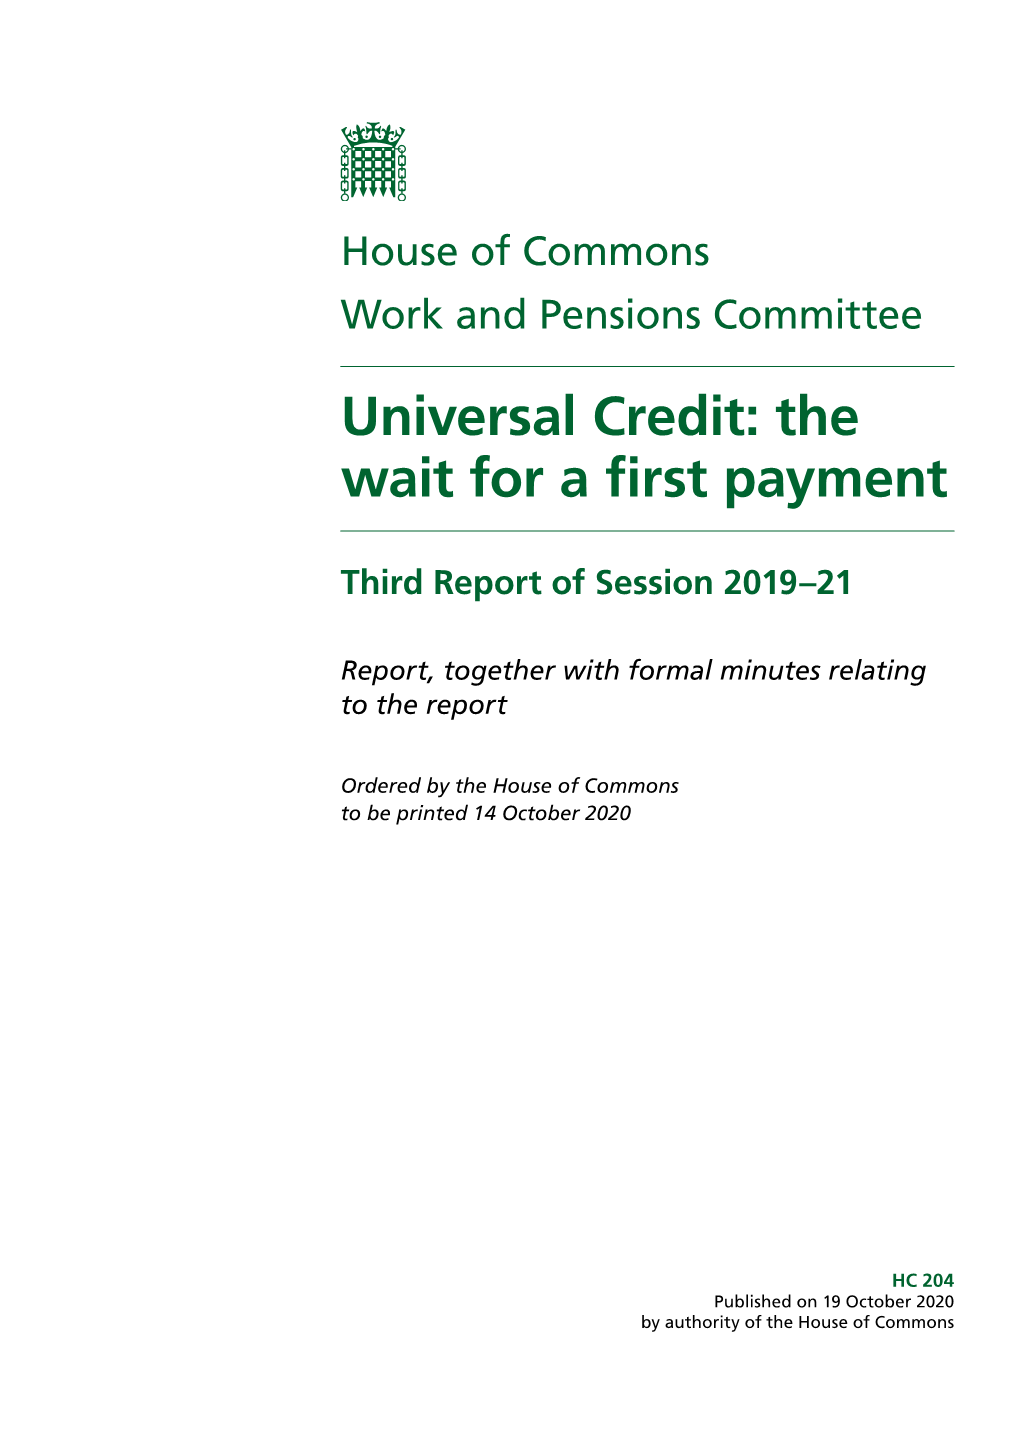 Universal Credit: the Wait for a First Payment